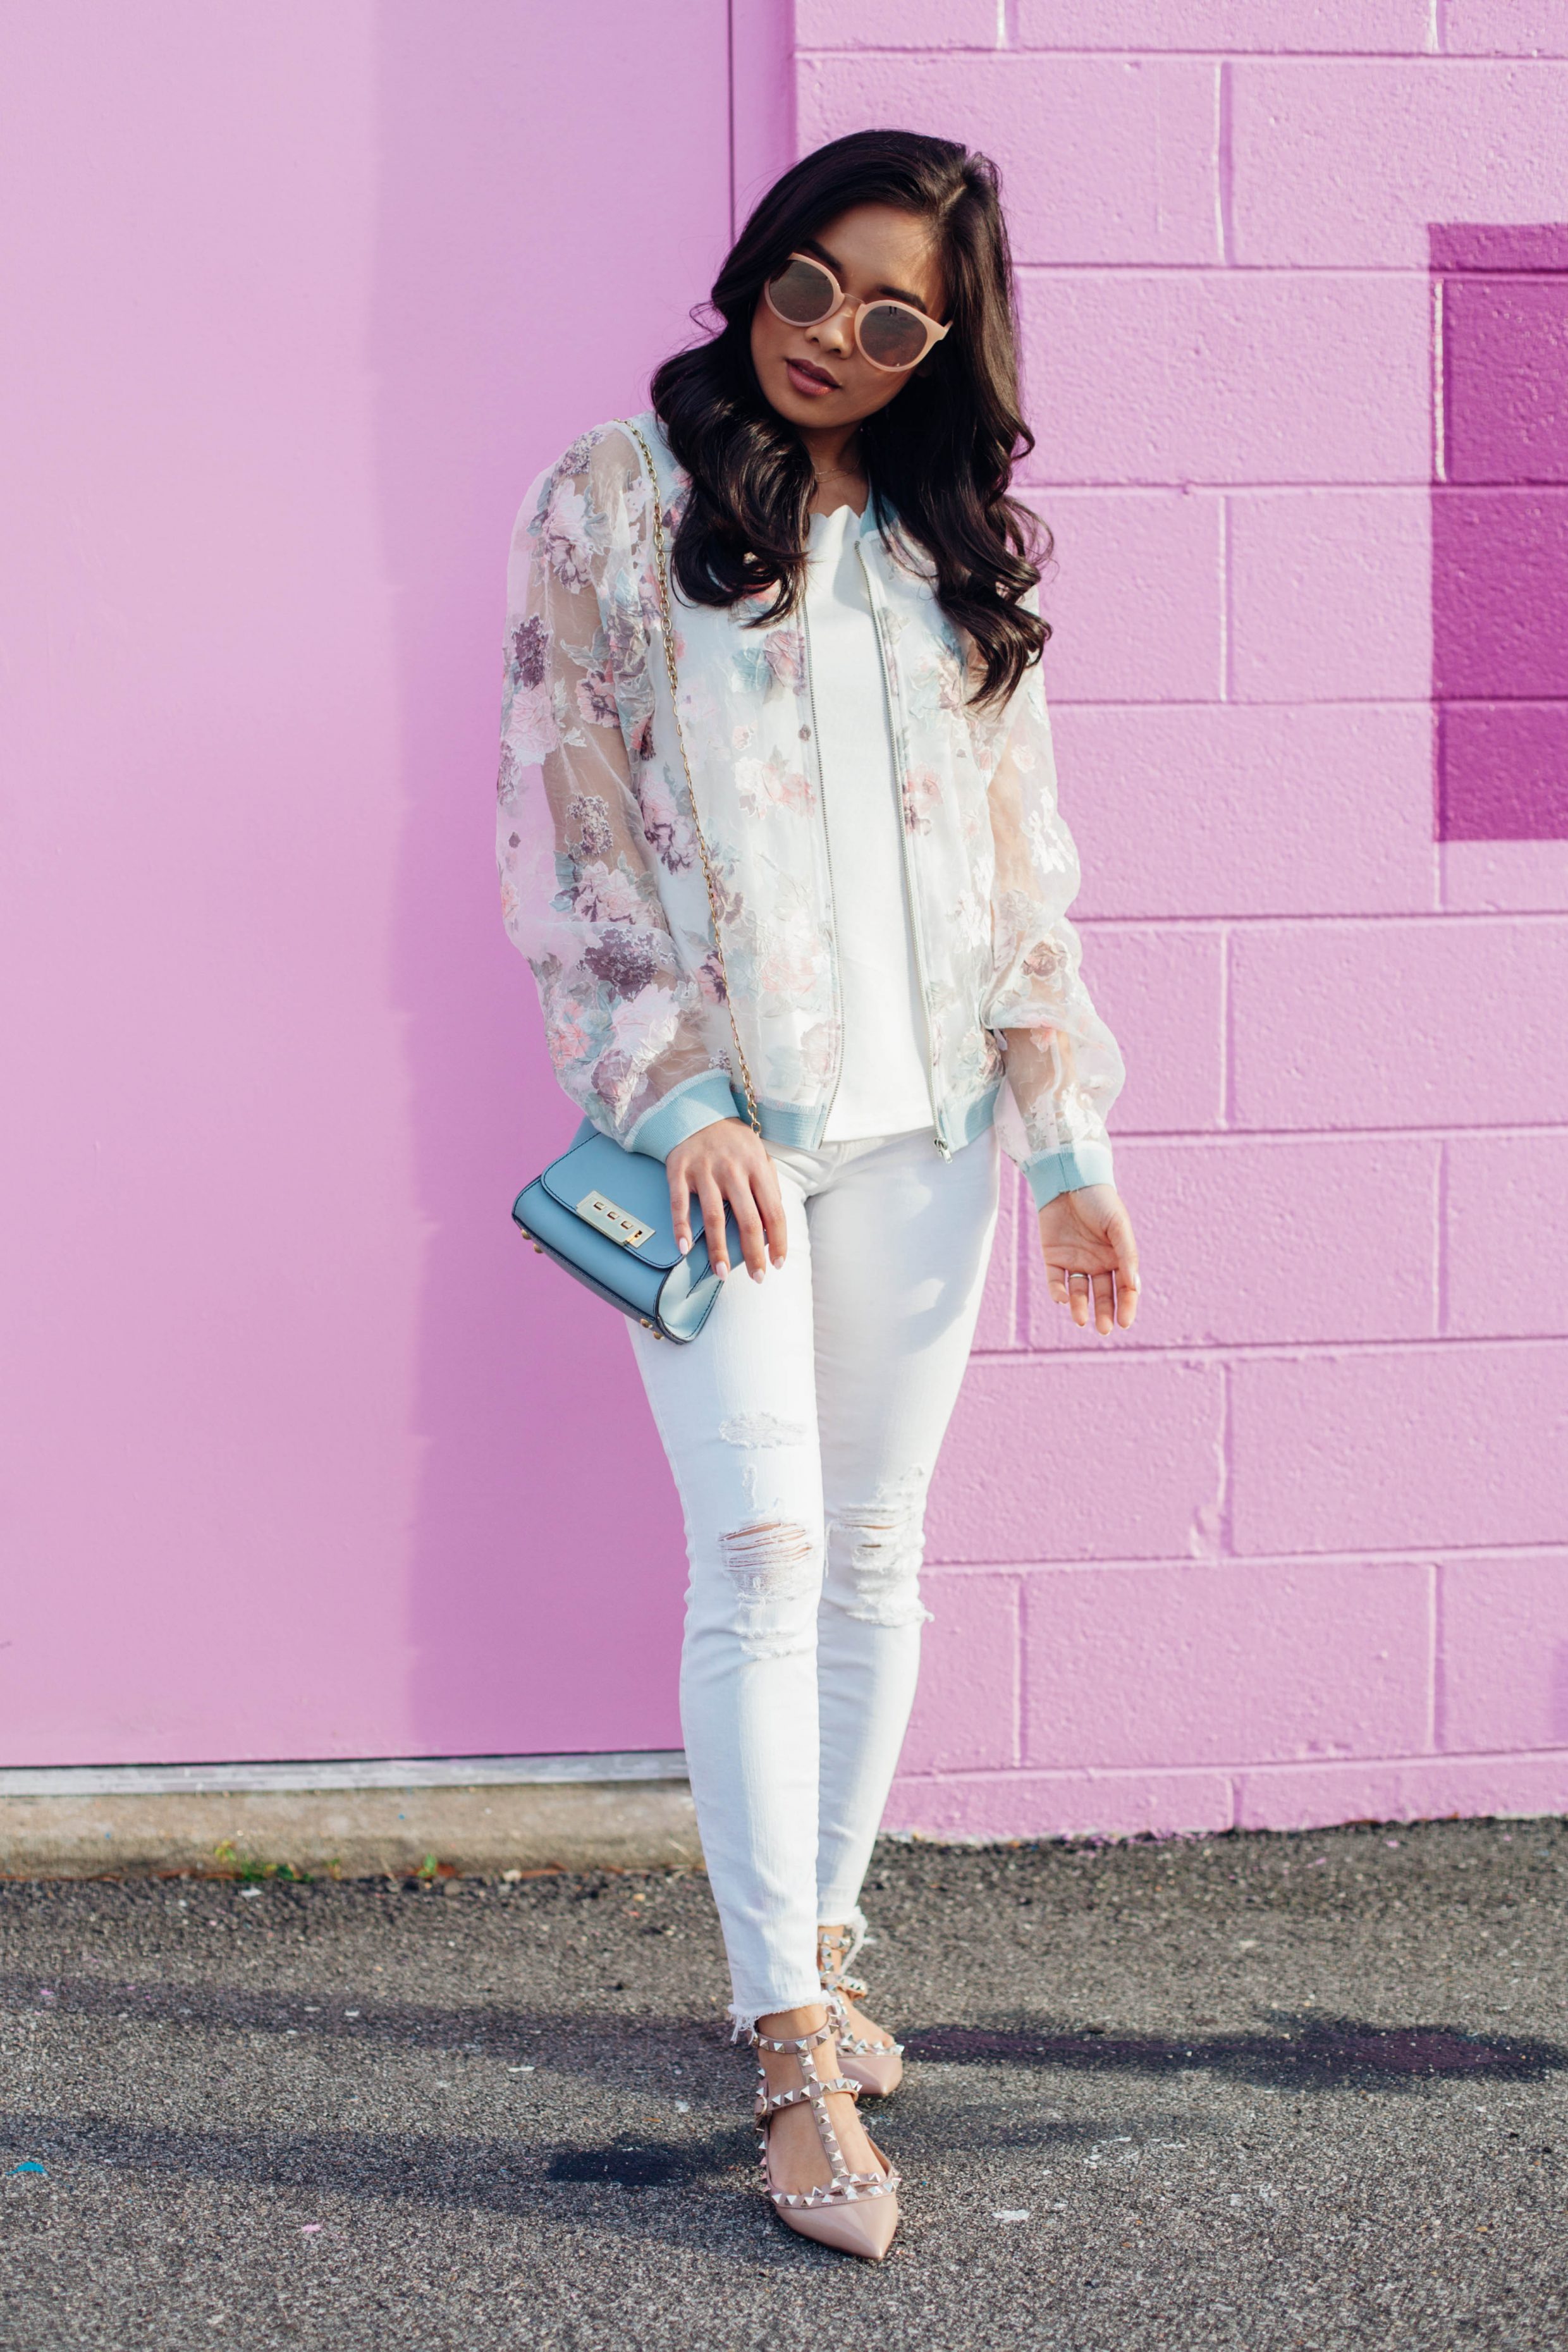 COLOR & CHIC | Floral bomber jacket over an all white look